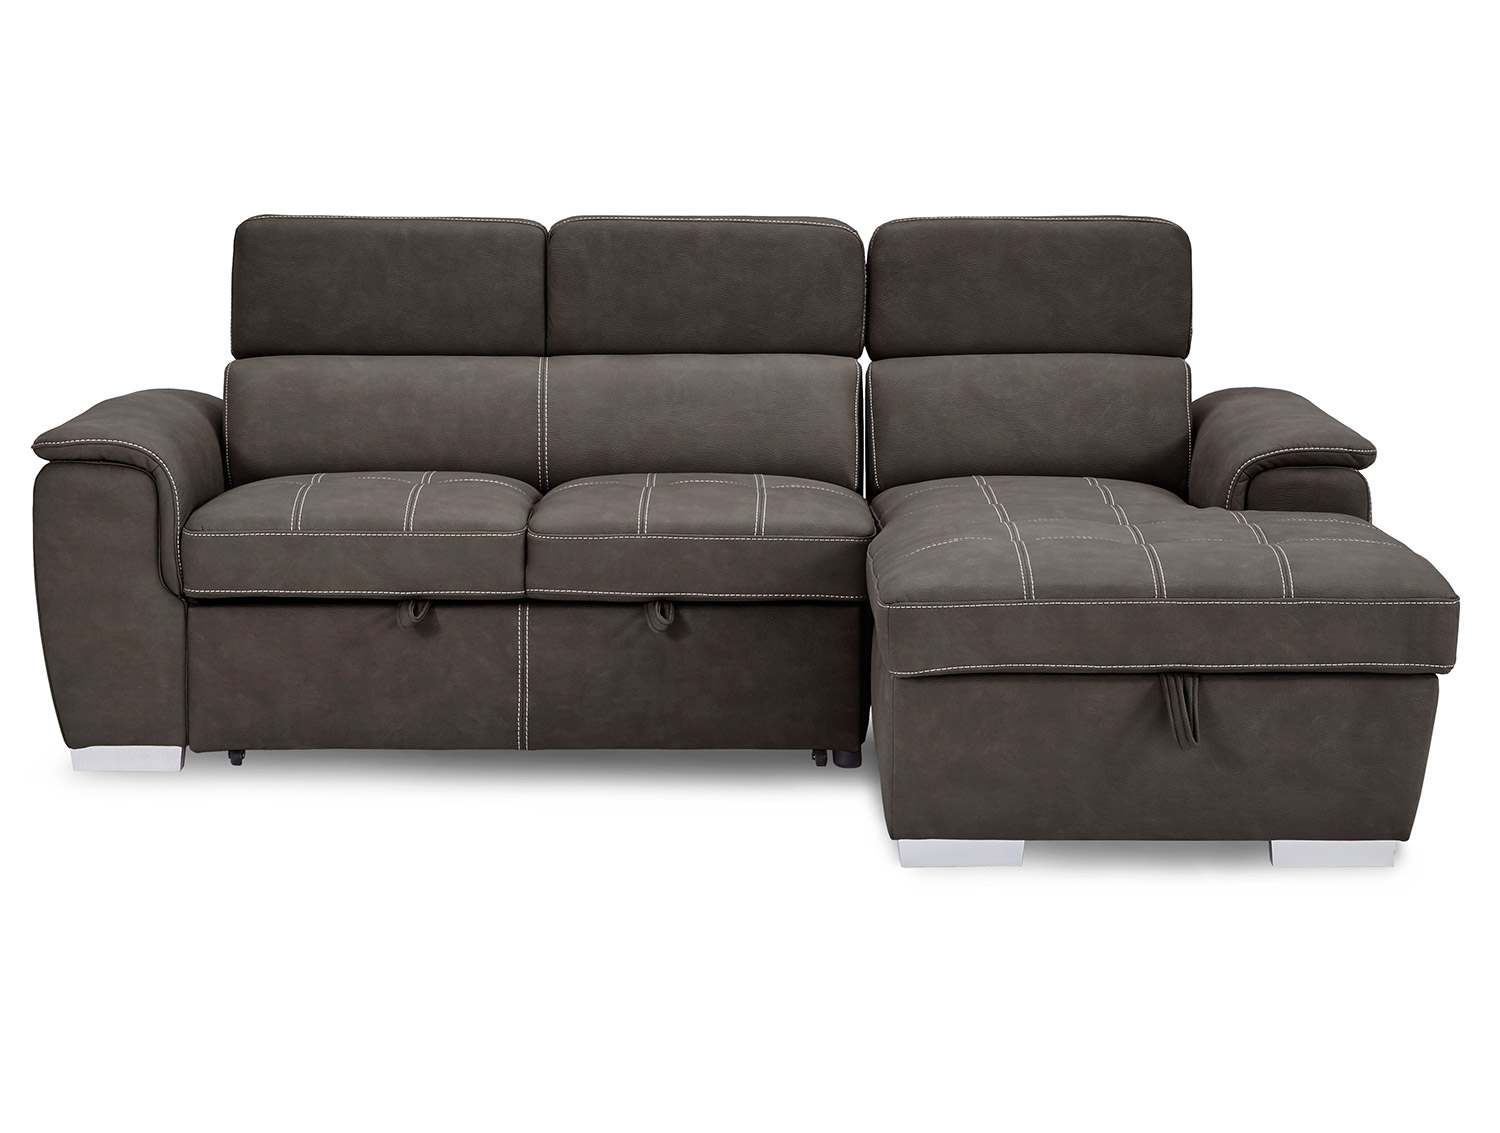 Homelegance Ferriday Sectional with Pull-out Bed and Hidden Storage Set - Taupe